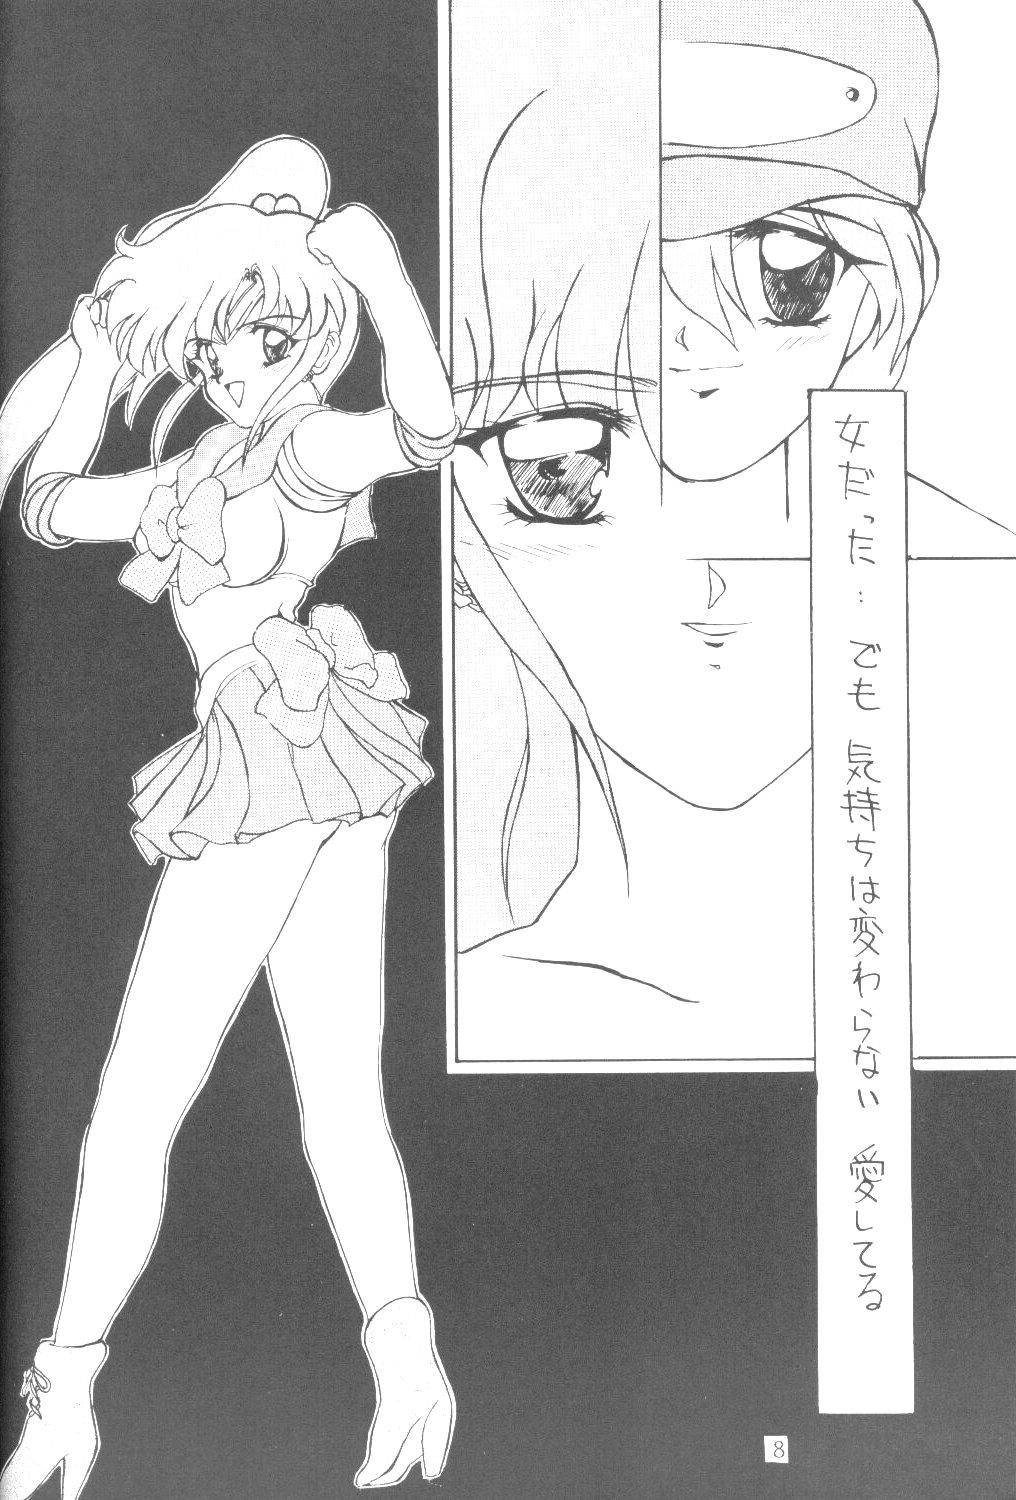 Banging ALIVE AMI LOST - Sailor moon Fuck For Cash - Page 7